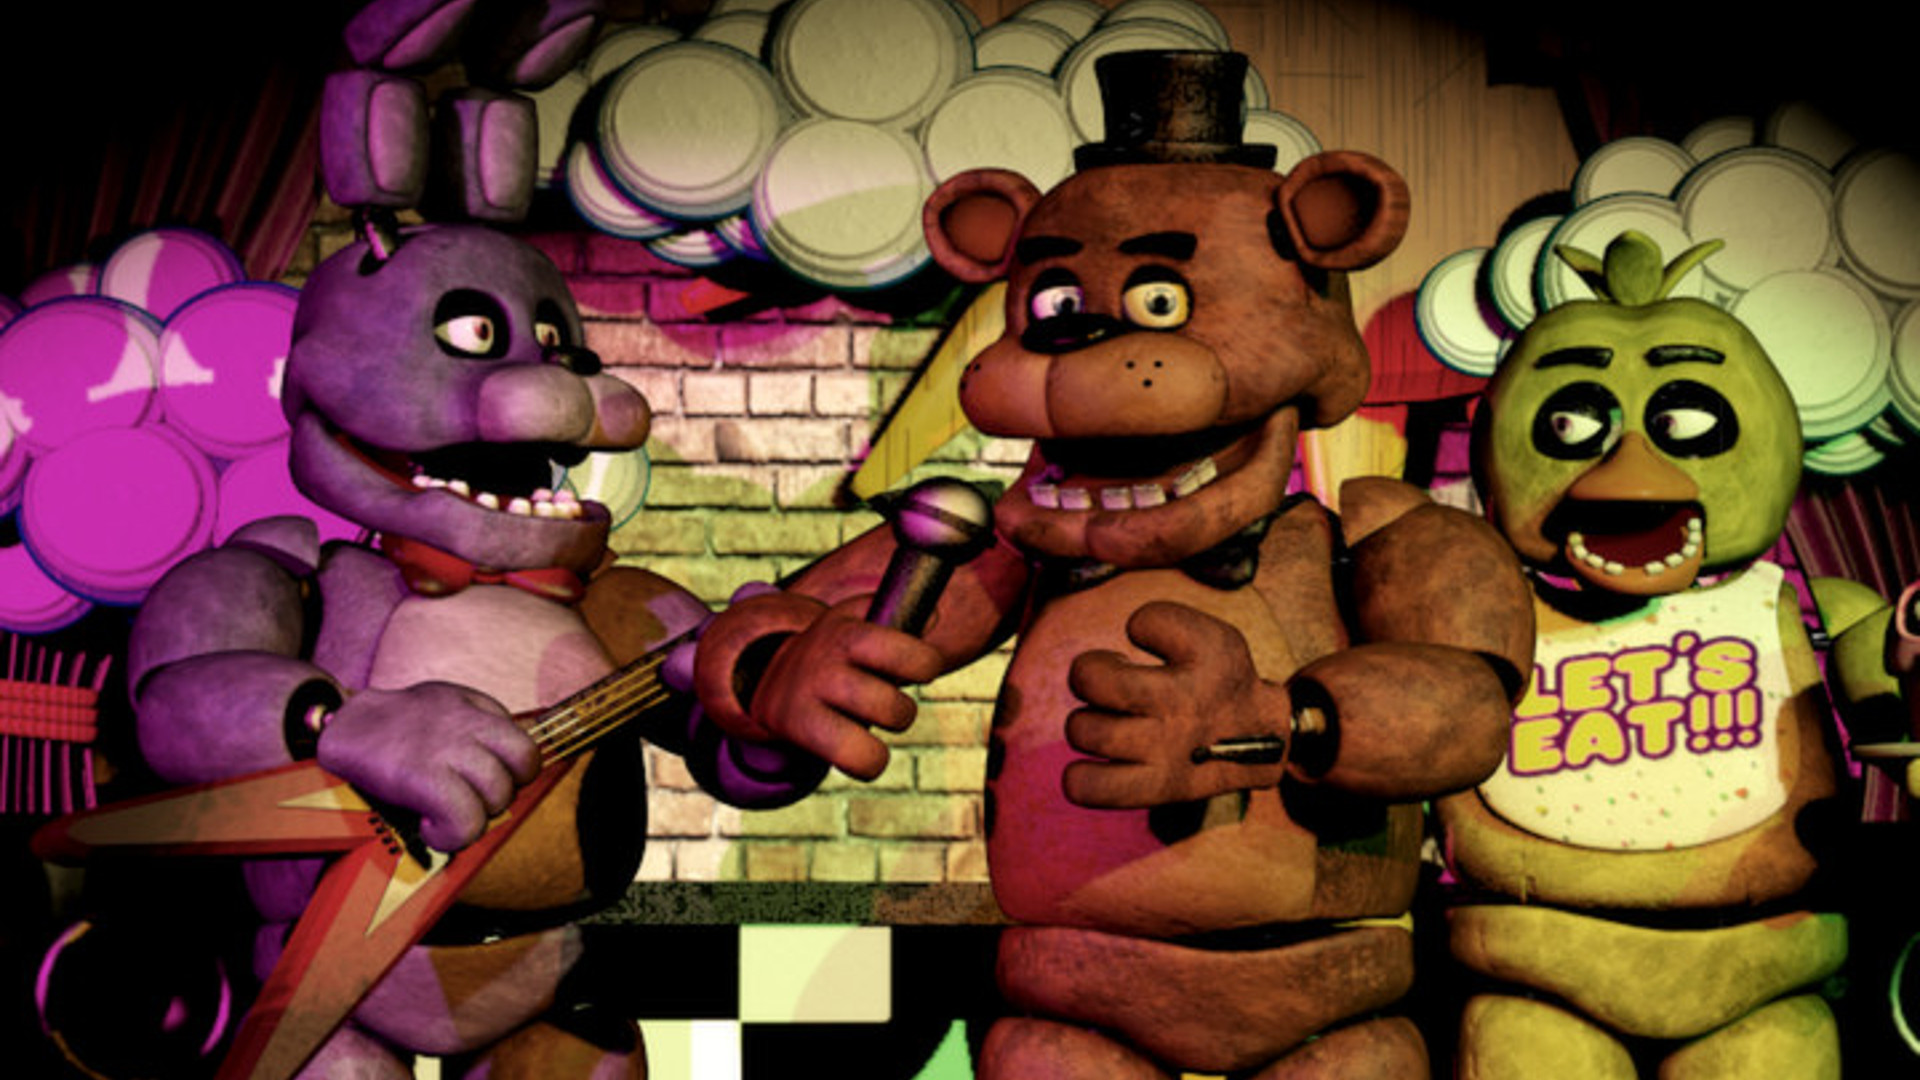 Five Nights at Freddy’s creator is helping fund and release fangames